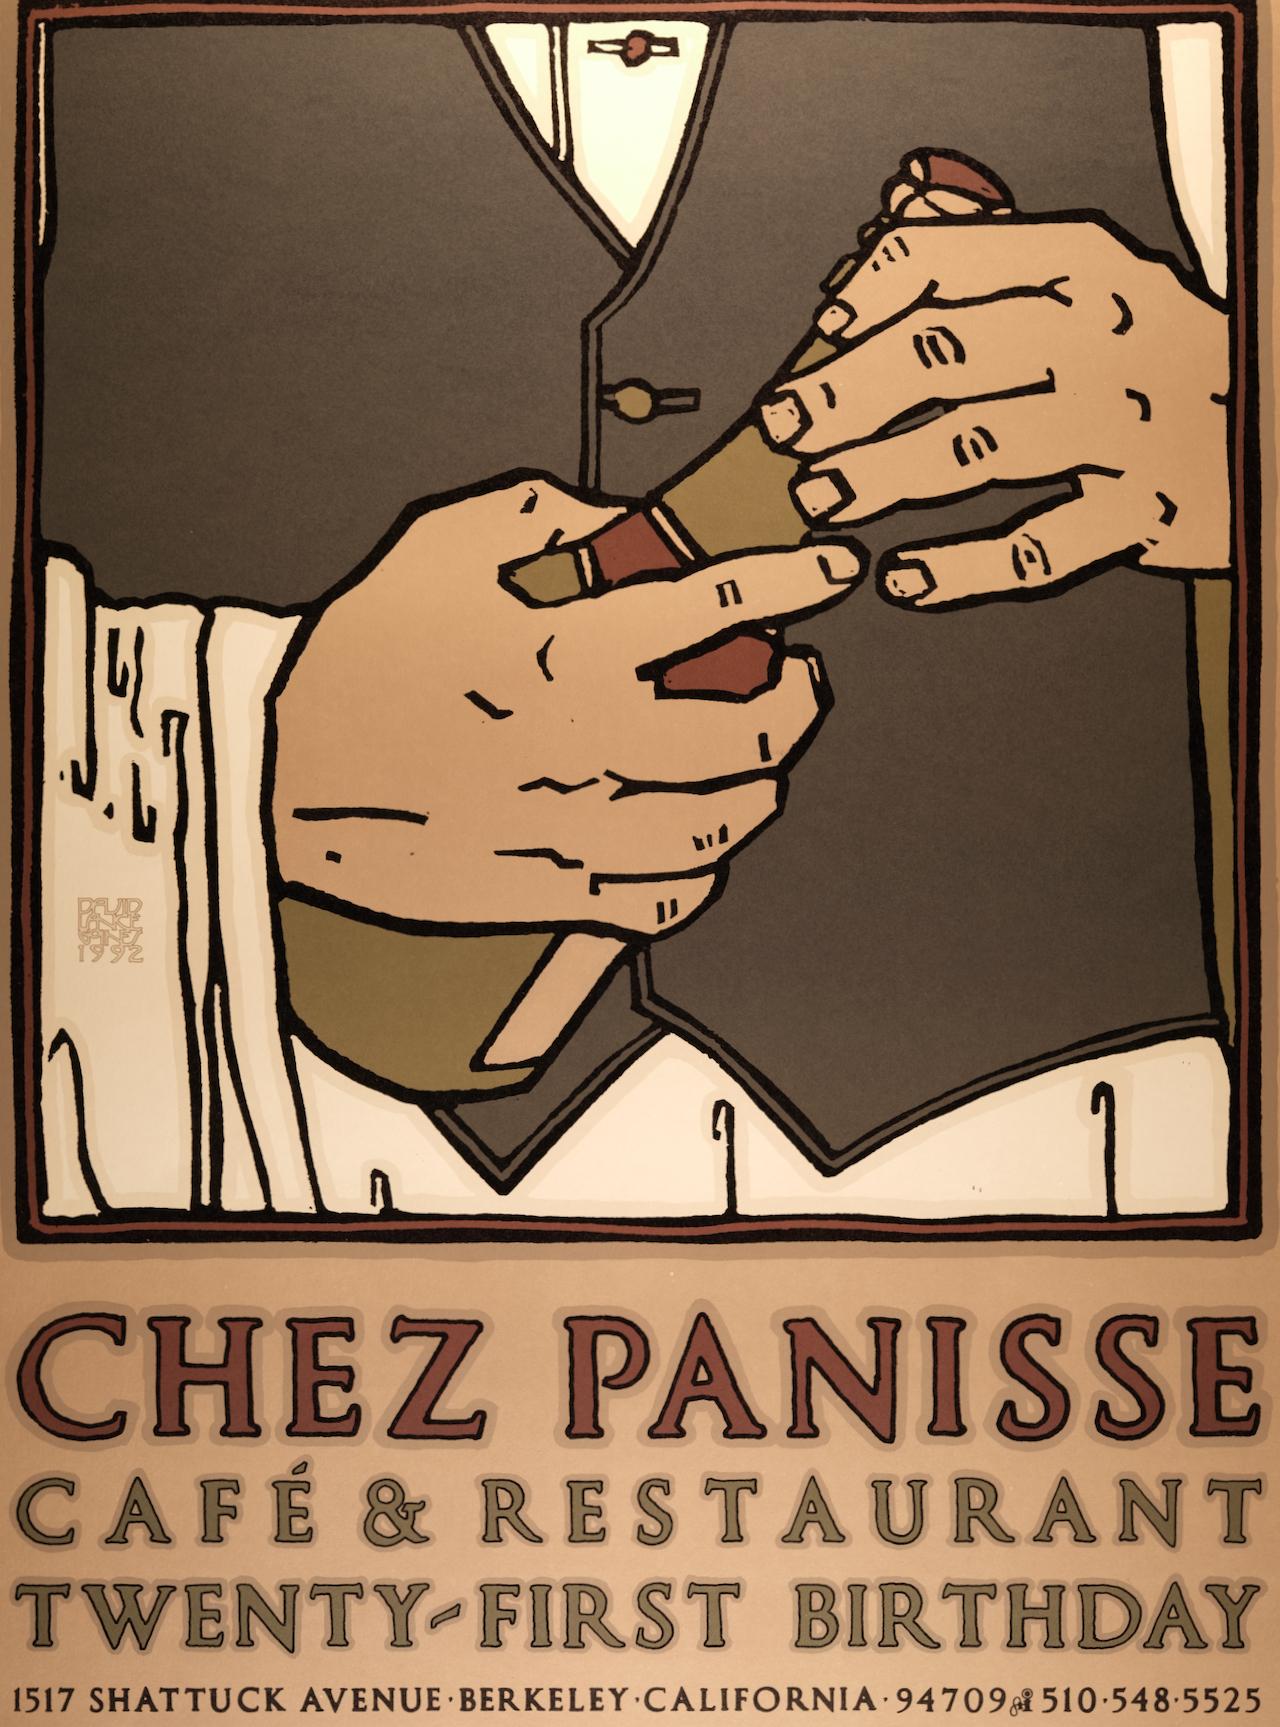 Chez Panisse 21st Birthday Celebration: Limited Ed. Goines Graphic Art Poster - Print by David Lance Goines